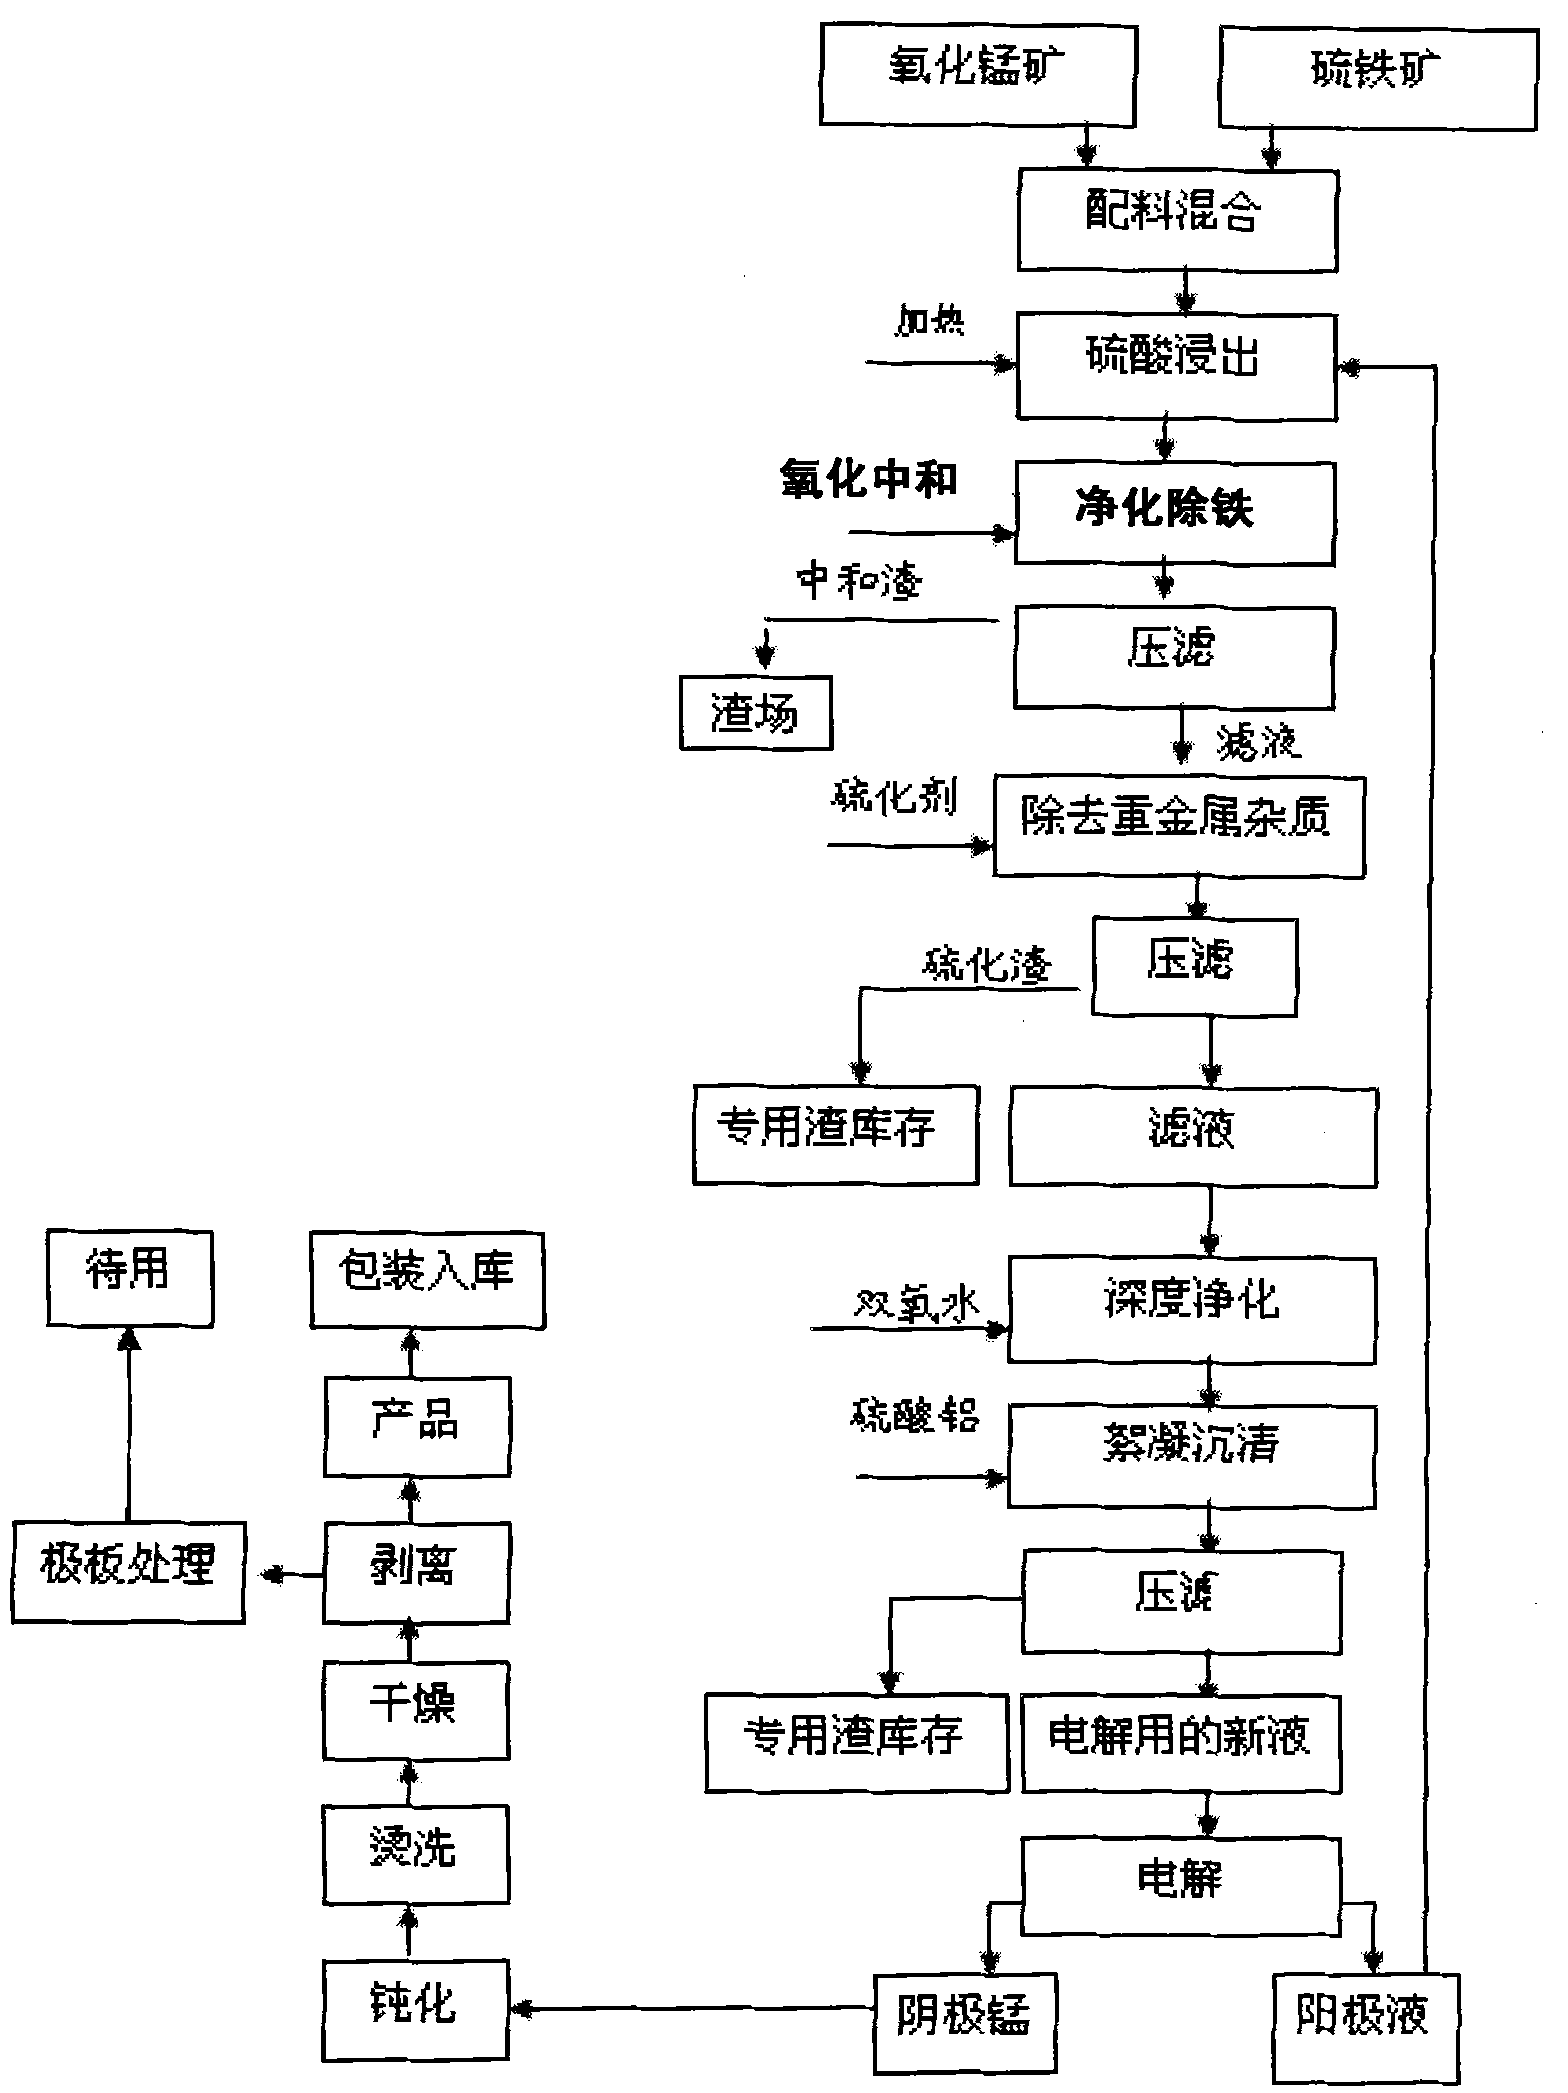 Improved device and method for producing electrolytic manganese metal by two-ore method